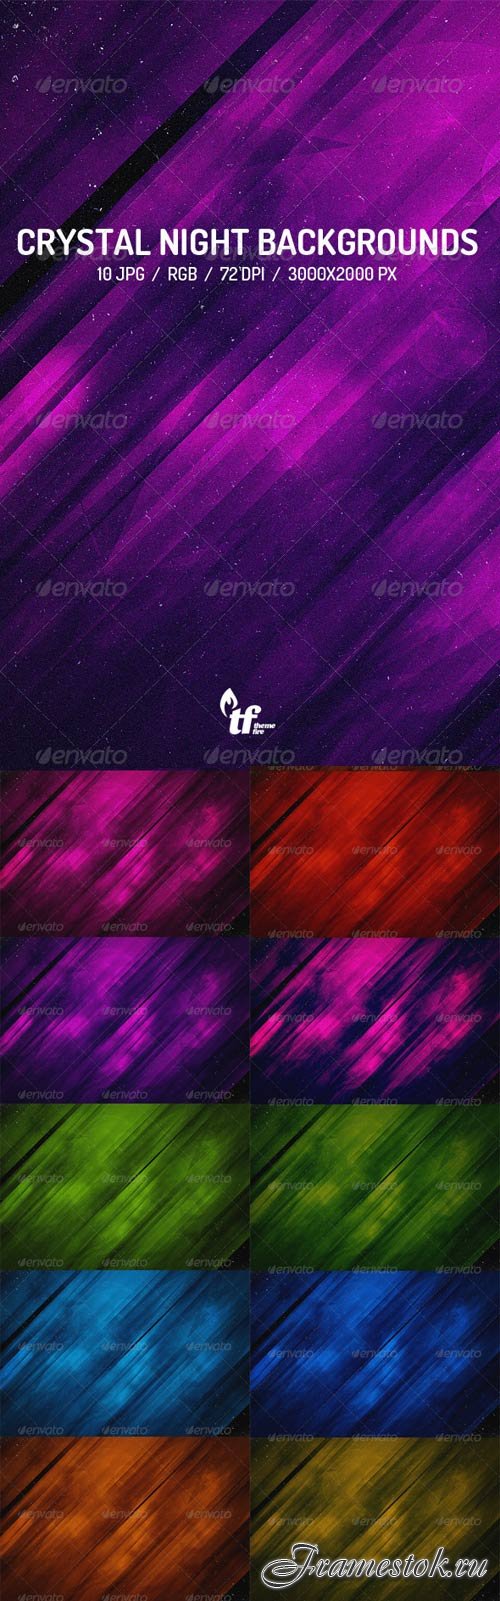 Crystal Night Backgrounds